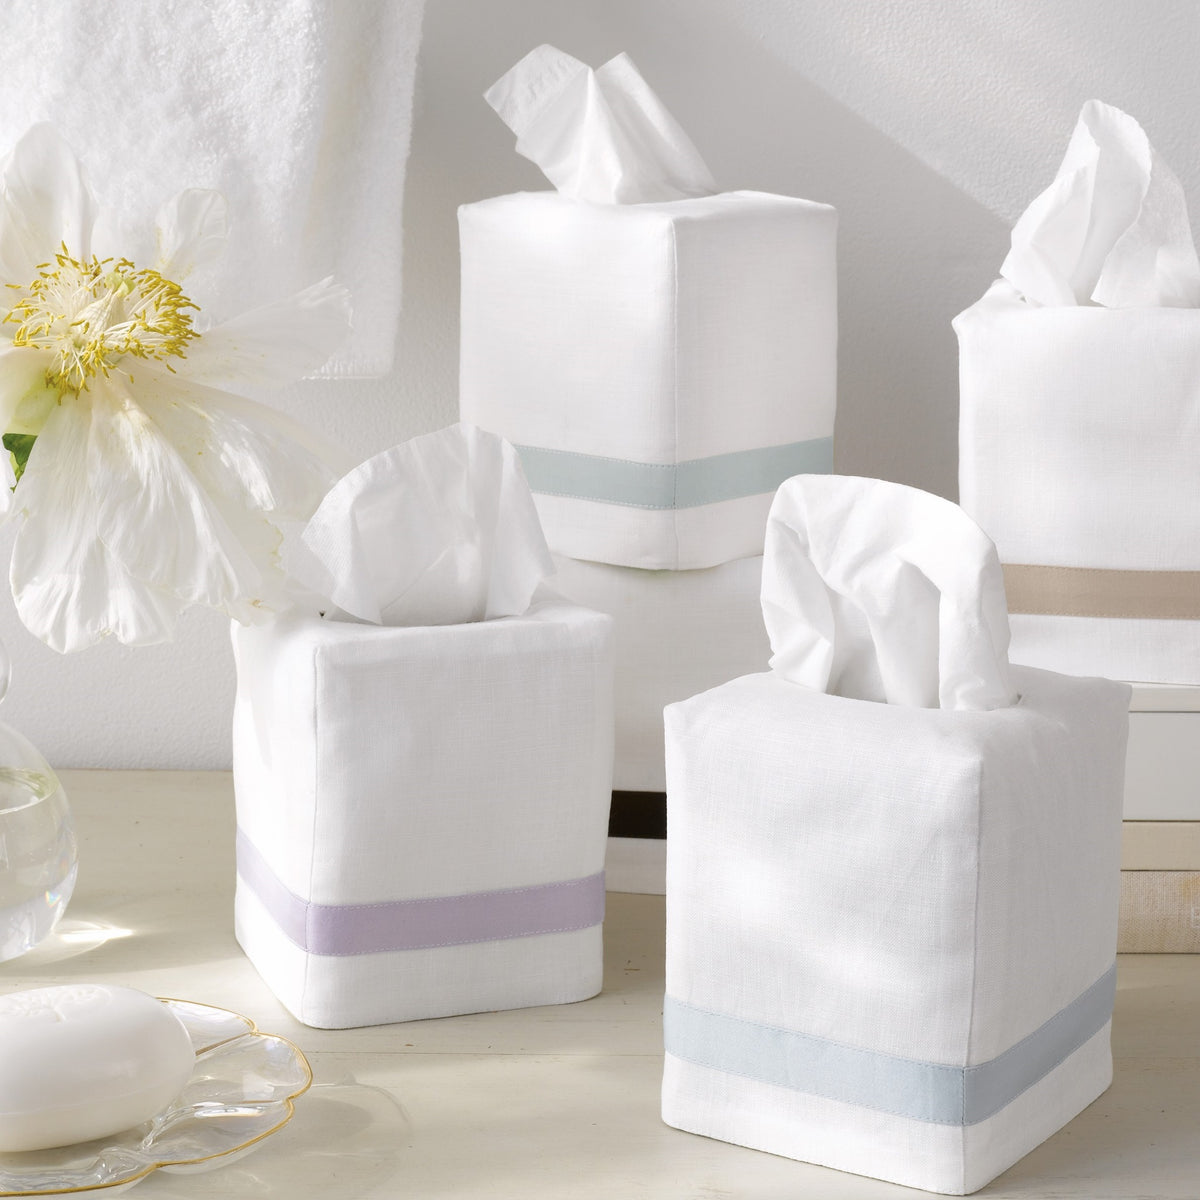 Lifestyle Image of Matouk Lowell Tissue Box Cover